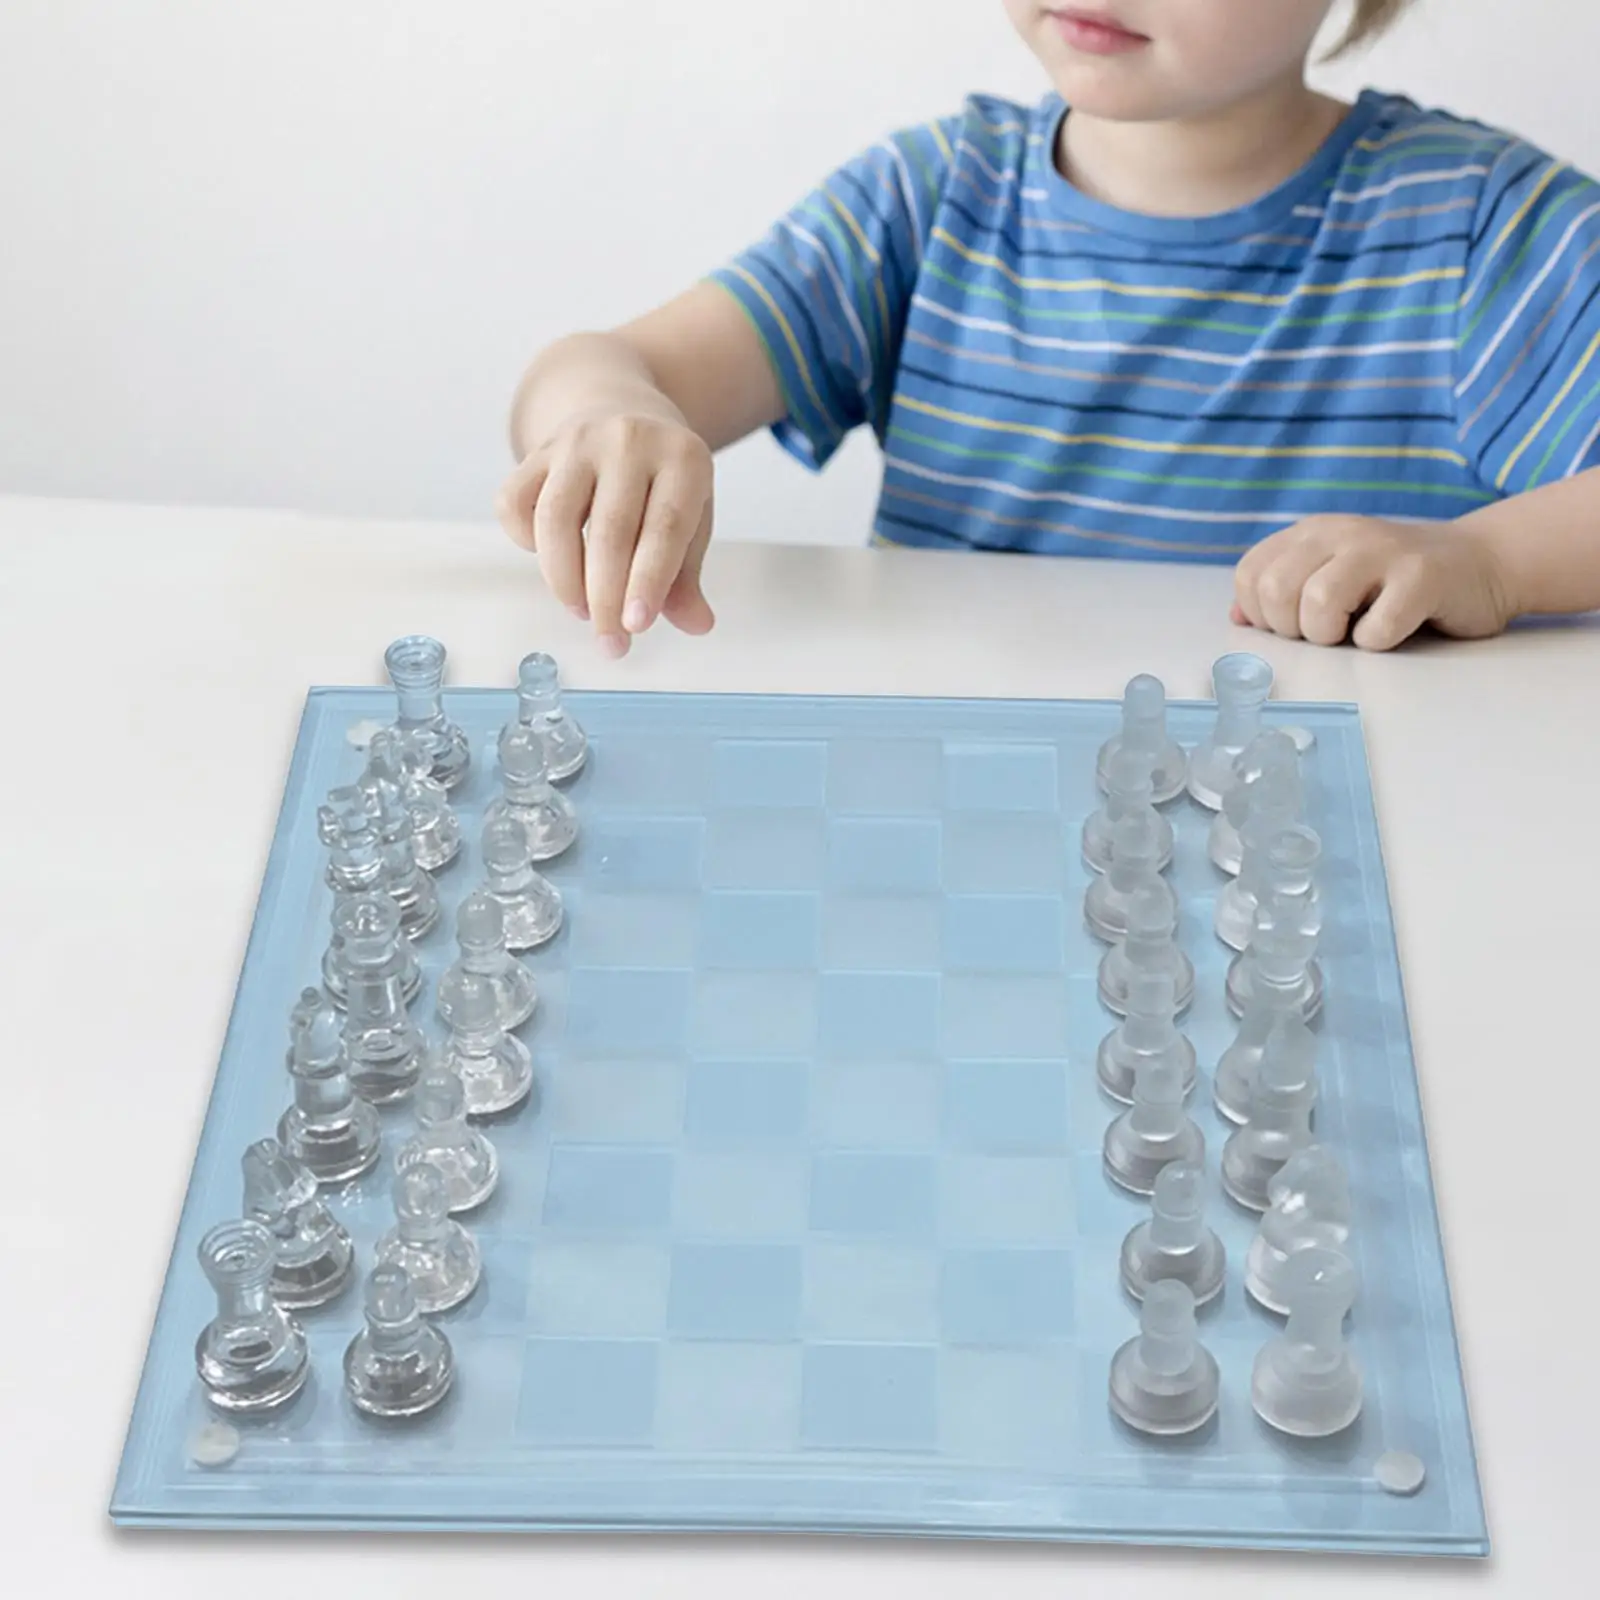 Crystal Chess Board Adults Play Set 13.78`x13.78`` for Game Reunion Picnics